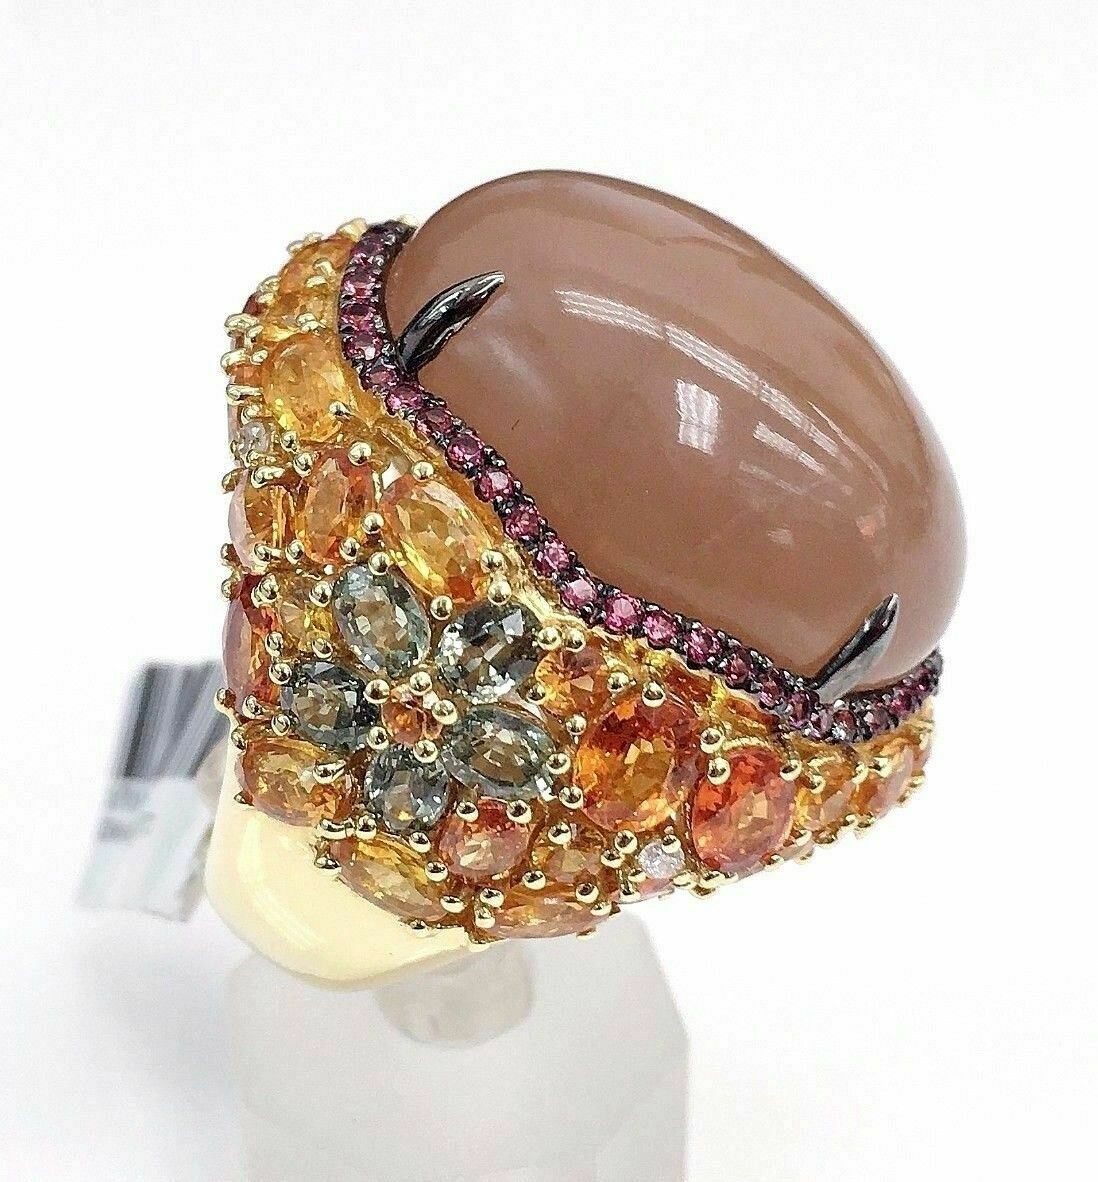 51.98 Carats t.w. Custom Made Ring with Sapphires,Diamonds and Quartz 18K Gold